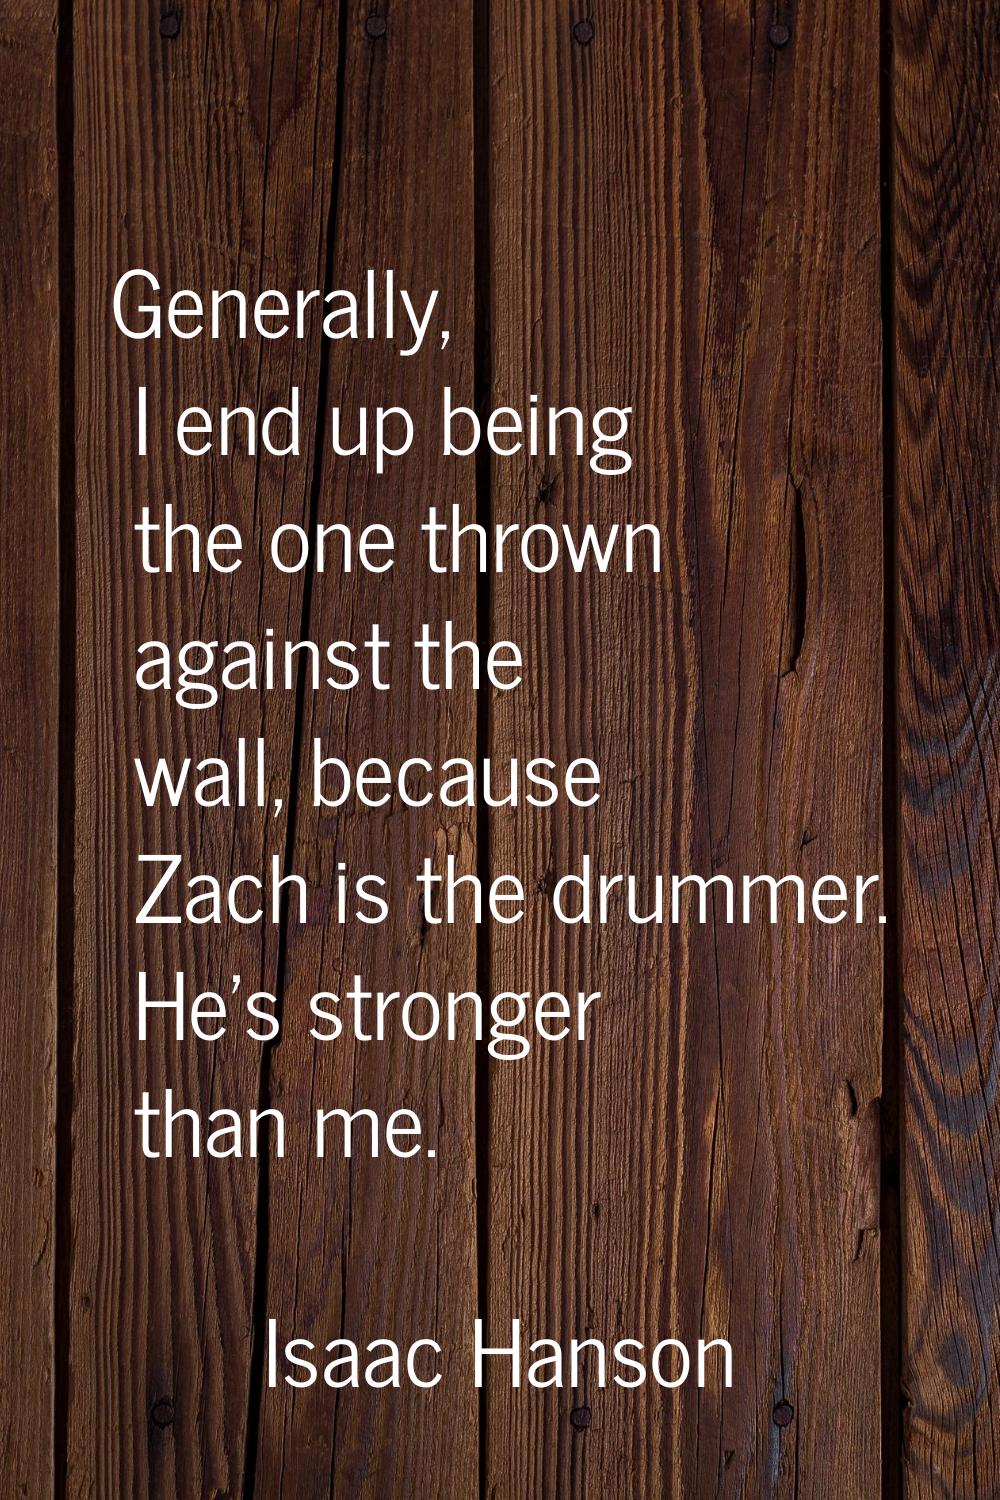 Generally, I end up being the one thrown against the wall, because Zach is the drummer. He's strong